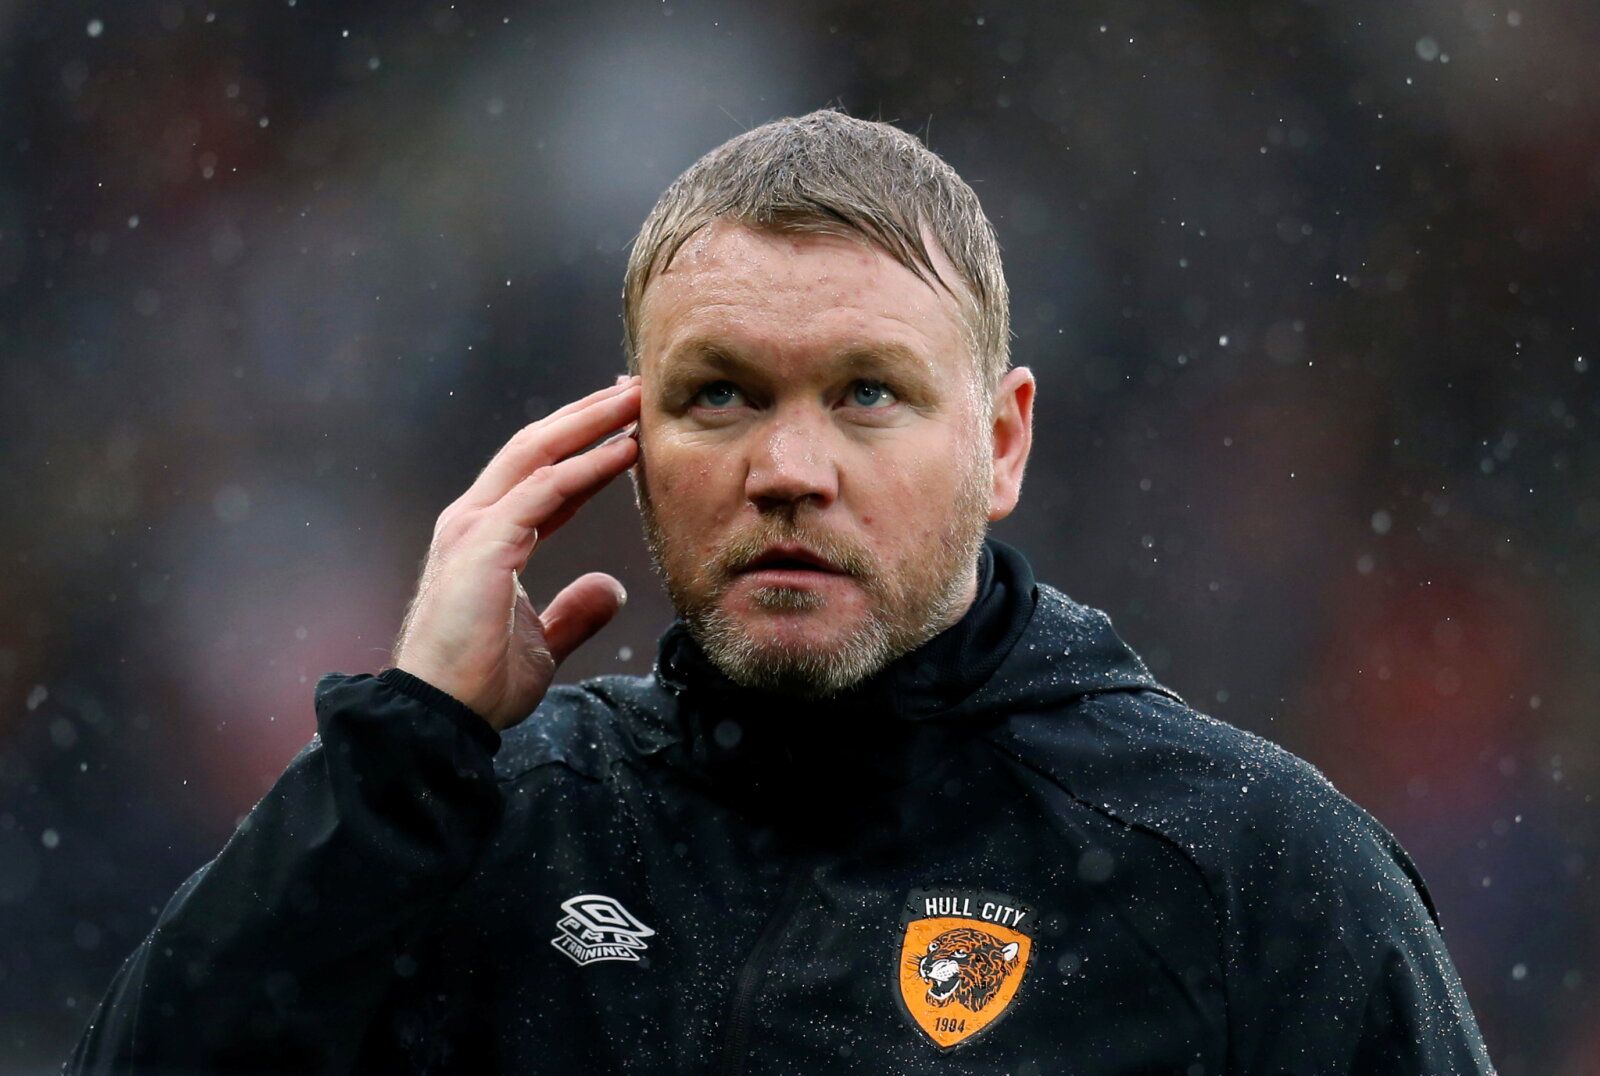 Soccer Football - Championship - Hull City v Middlesbrough - KCOM Stadium, Hull, Britain - October 2, 2021  Hull City manager Grant McCann  Action Images/Ed Sykes  EDITORIAL USE ONLY. No use with unauthorized audio, video, data, fixture lists, club/league logos or 